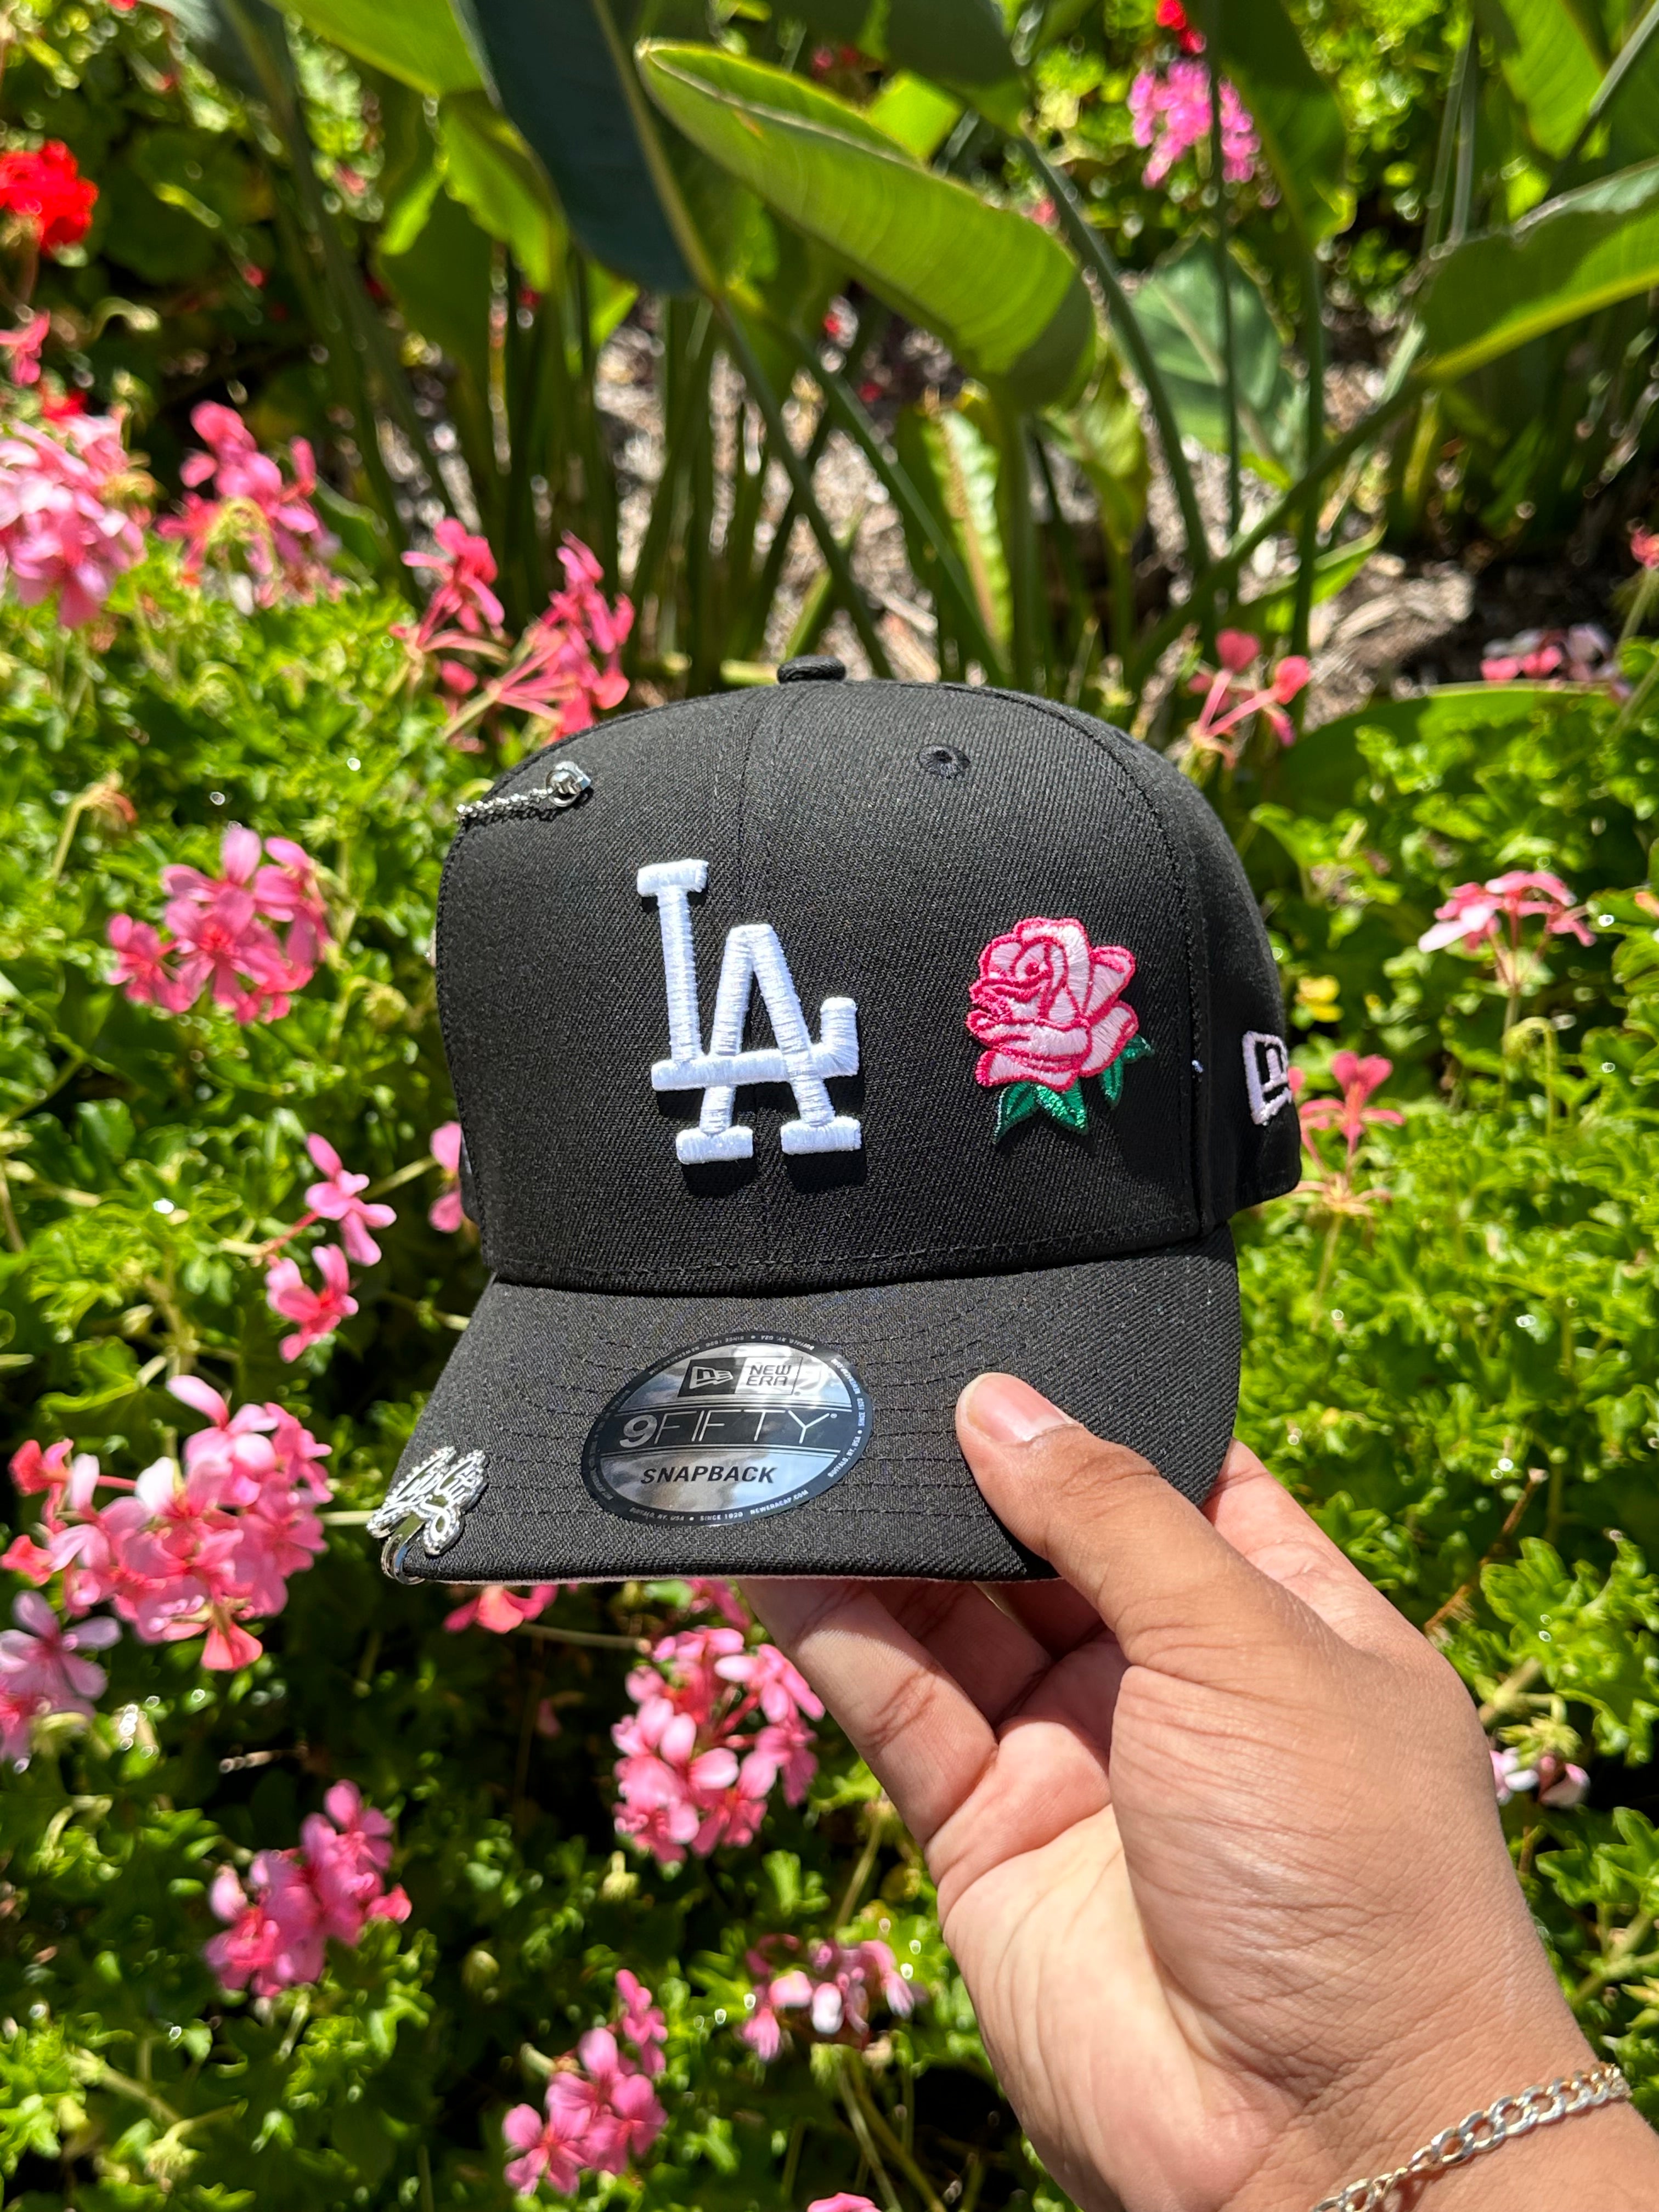 NEW ERA EXCLUSIVE 9FIFTY BLACK LOS ANGELES DODGERS SNAPBACK W/ PINK ROSE + 50TH ANNIVERSARY PATCH